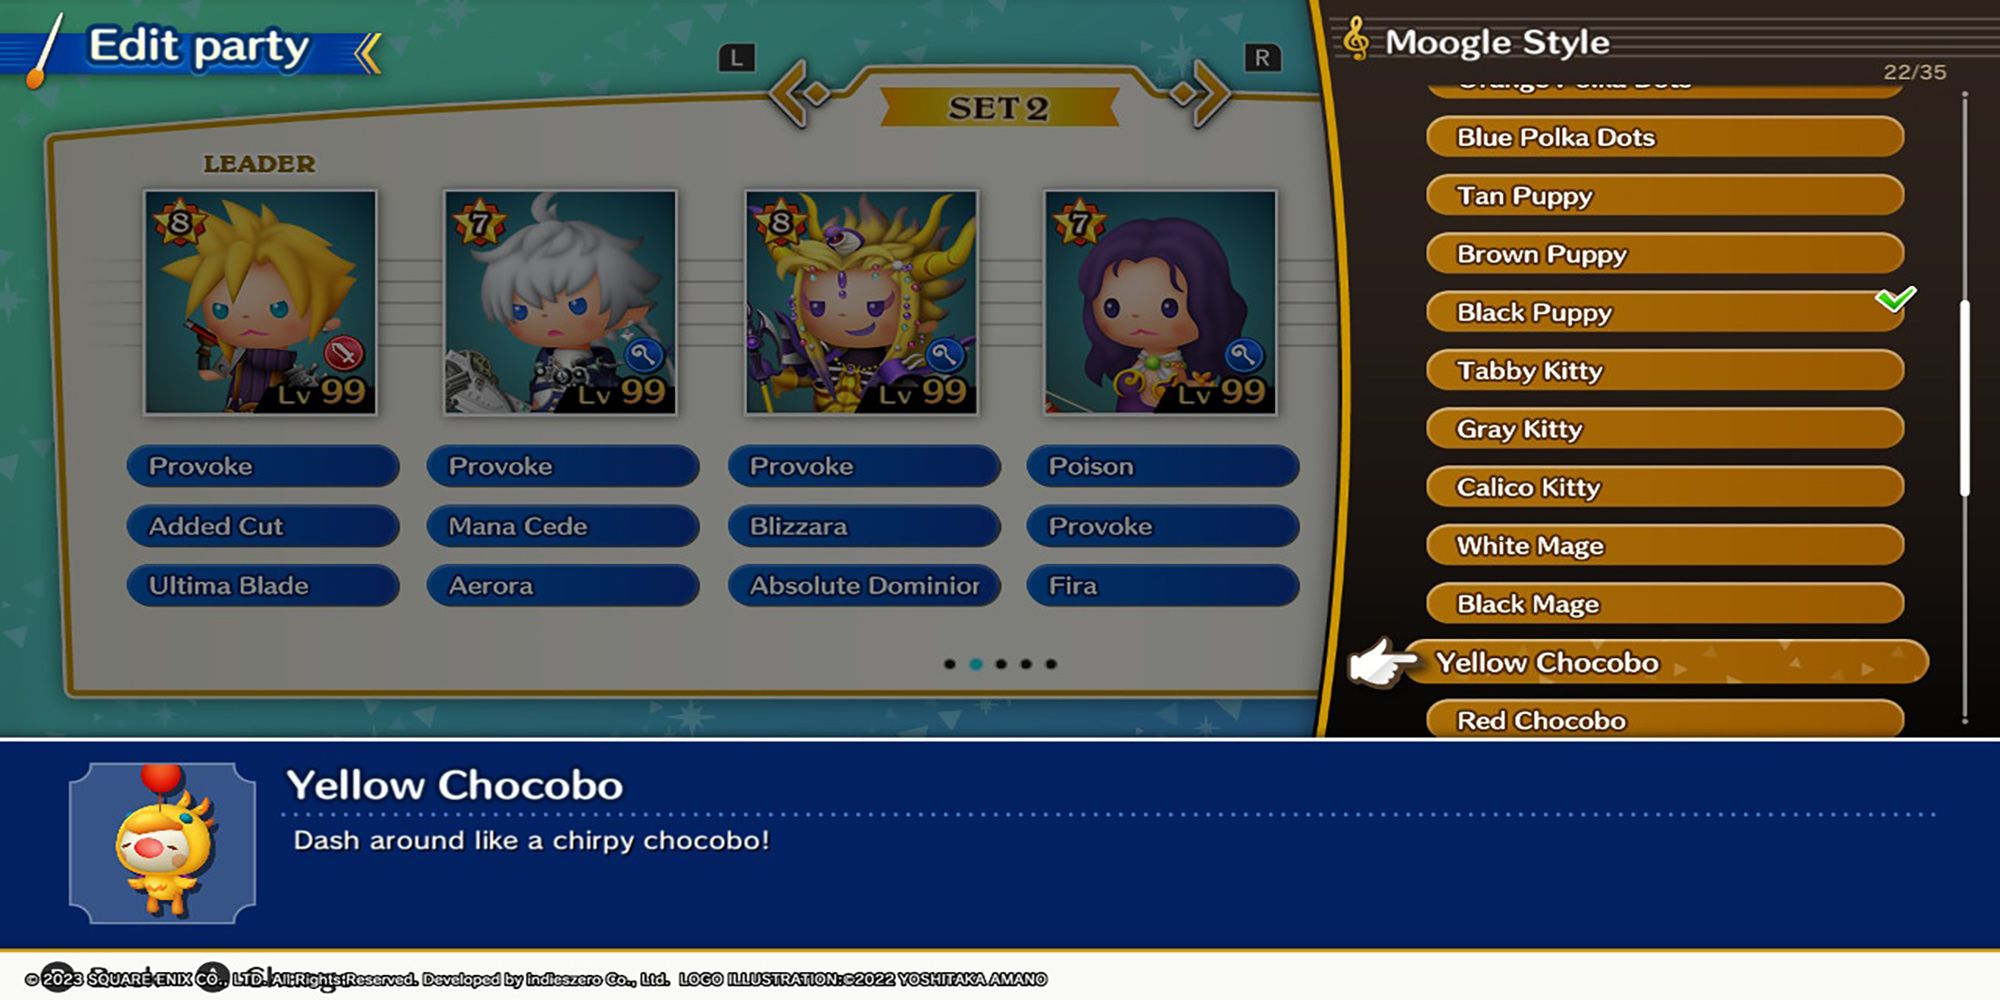 The moogle style list as displayed in Theatrhythm: Final Bar Line's Edit Party menu.